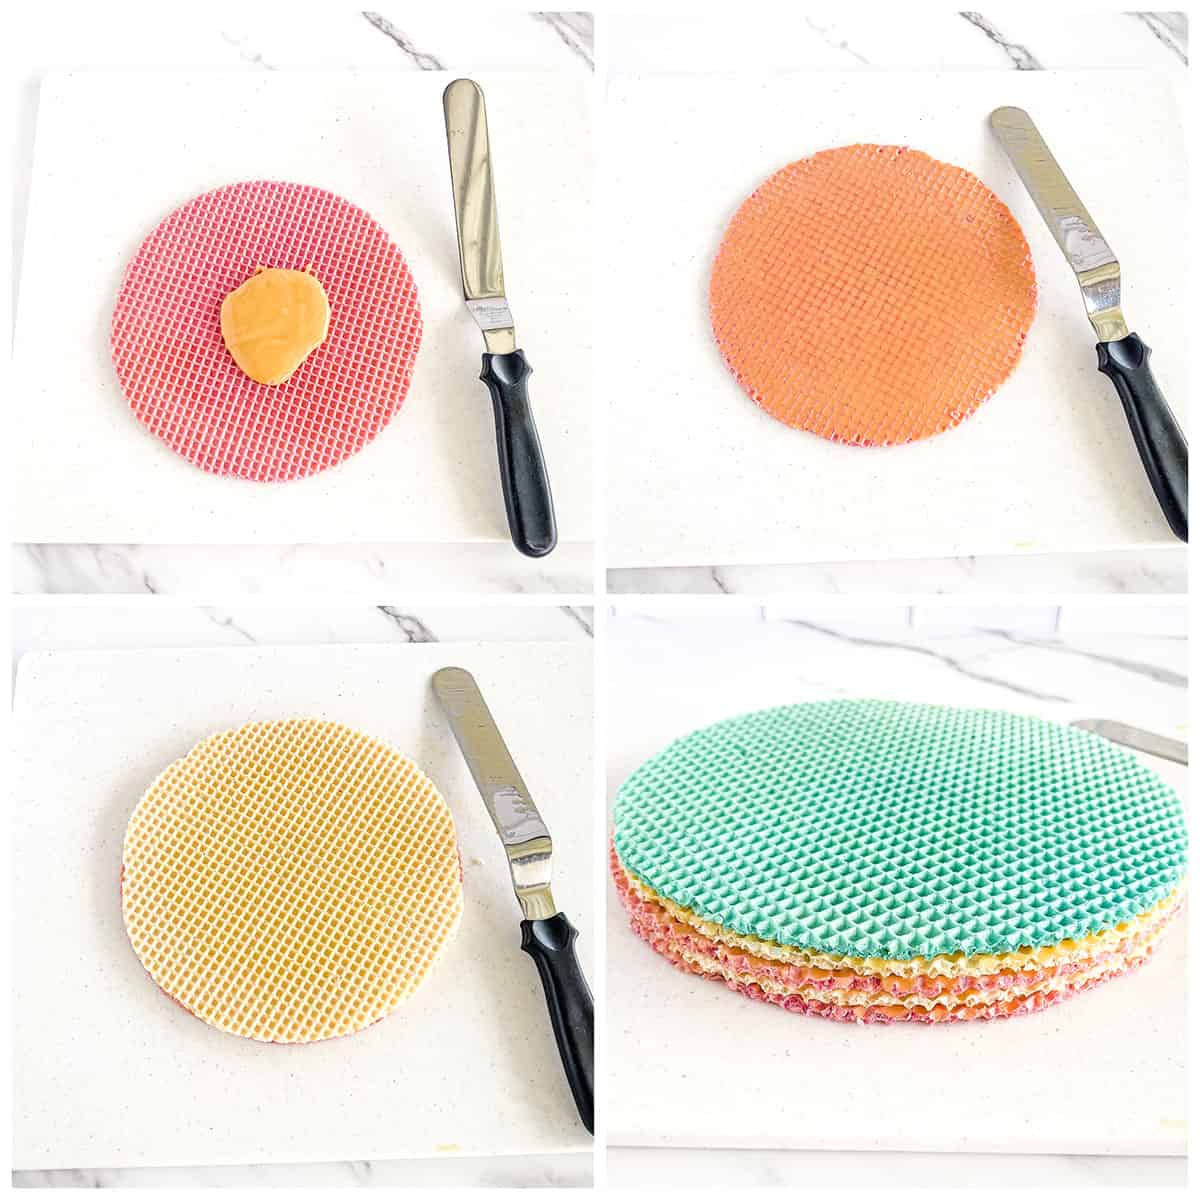 Spread condensed milk on a wafer disc, completely covering it to the edges. Spread condensed milk only on the top side of each wafer disk.